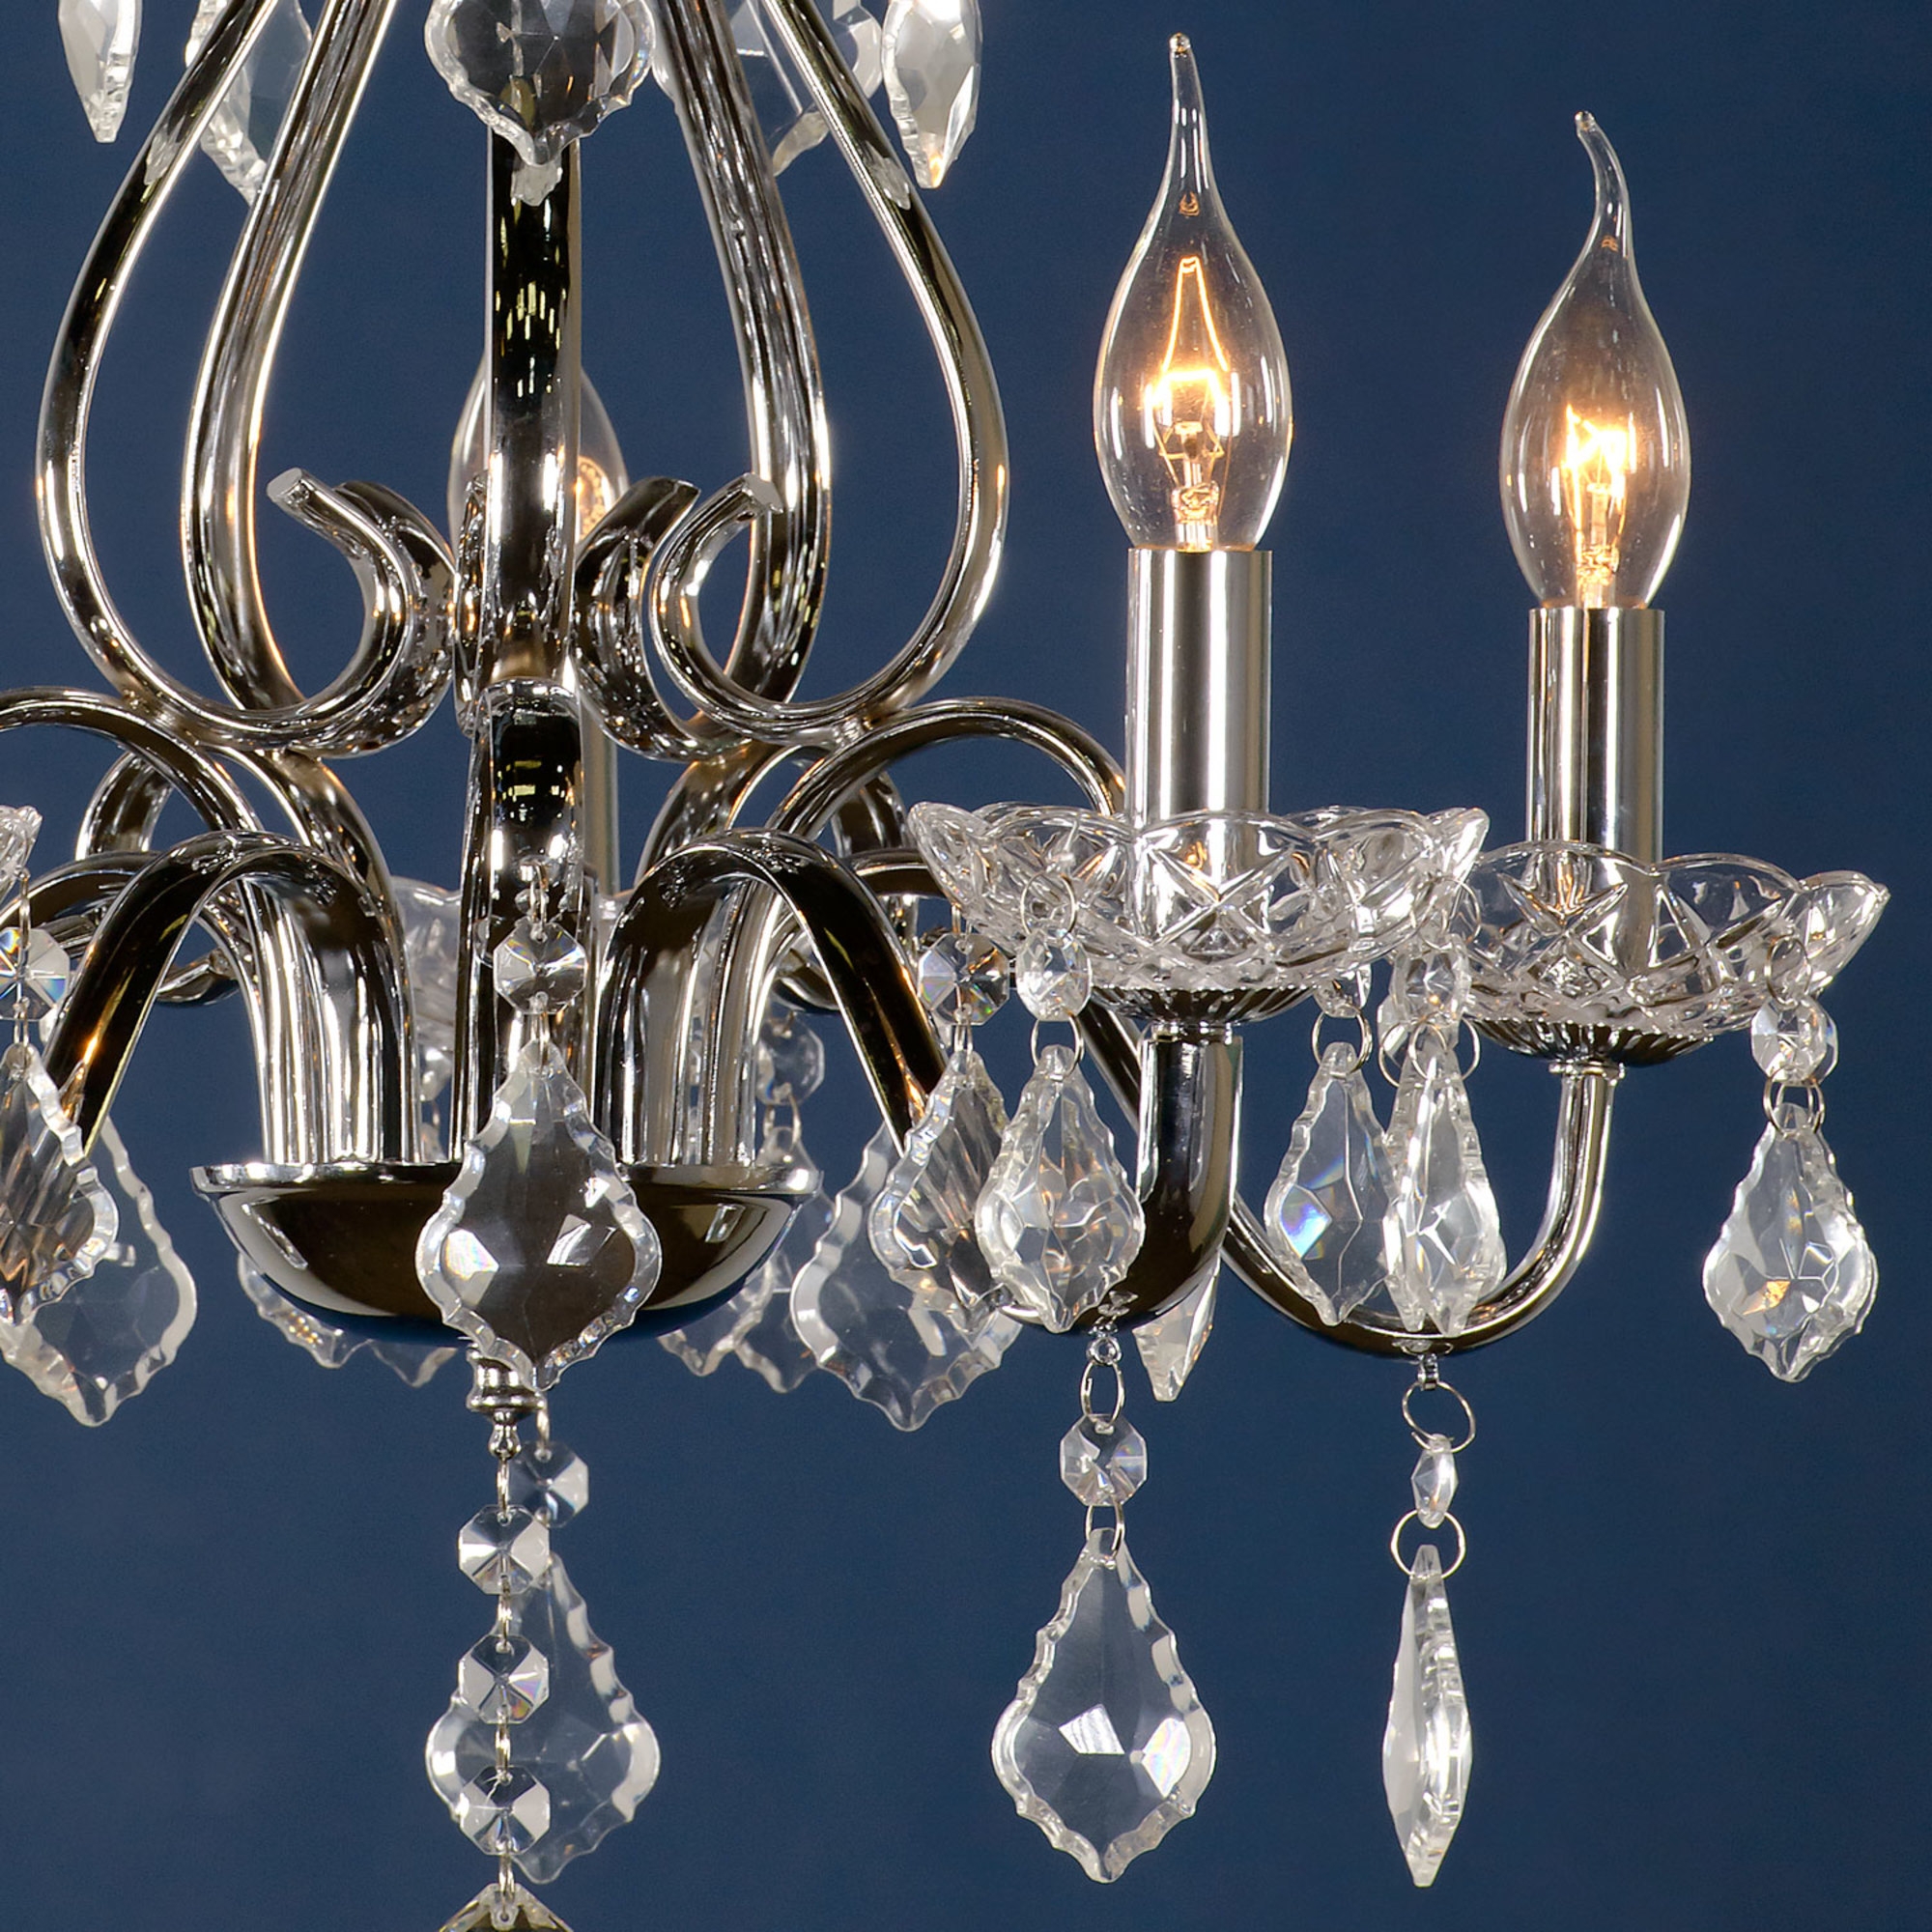 Vintage 5 Light Chandelier - Chrome and Clear